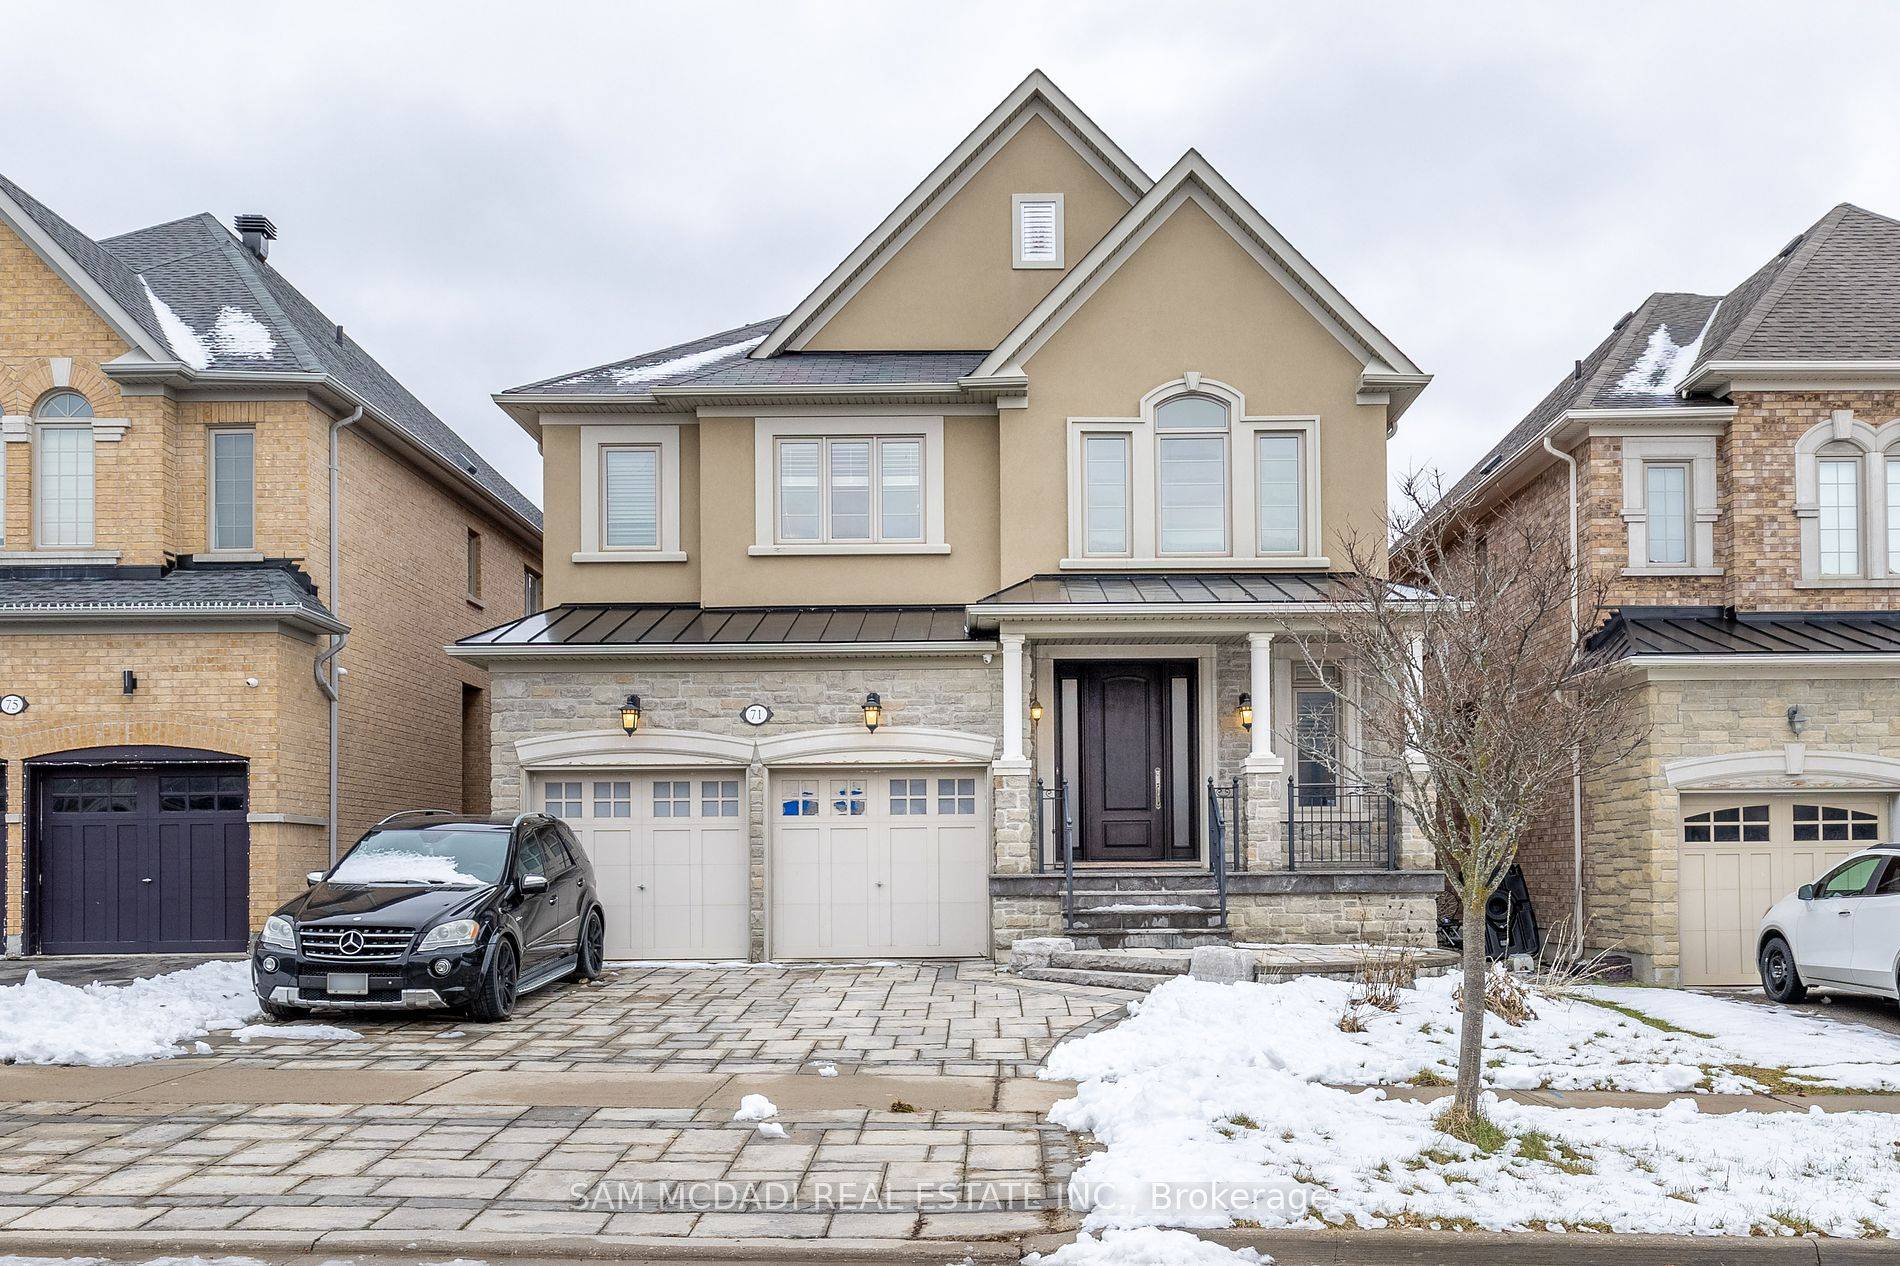 Absolutely Gorgeous, Bright Home With Stone Front On A Fabulous Street.